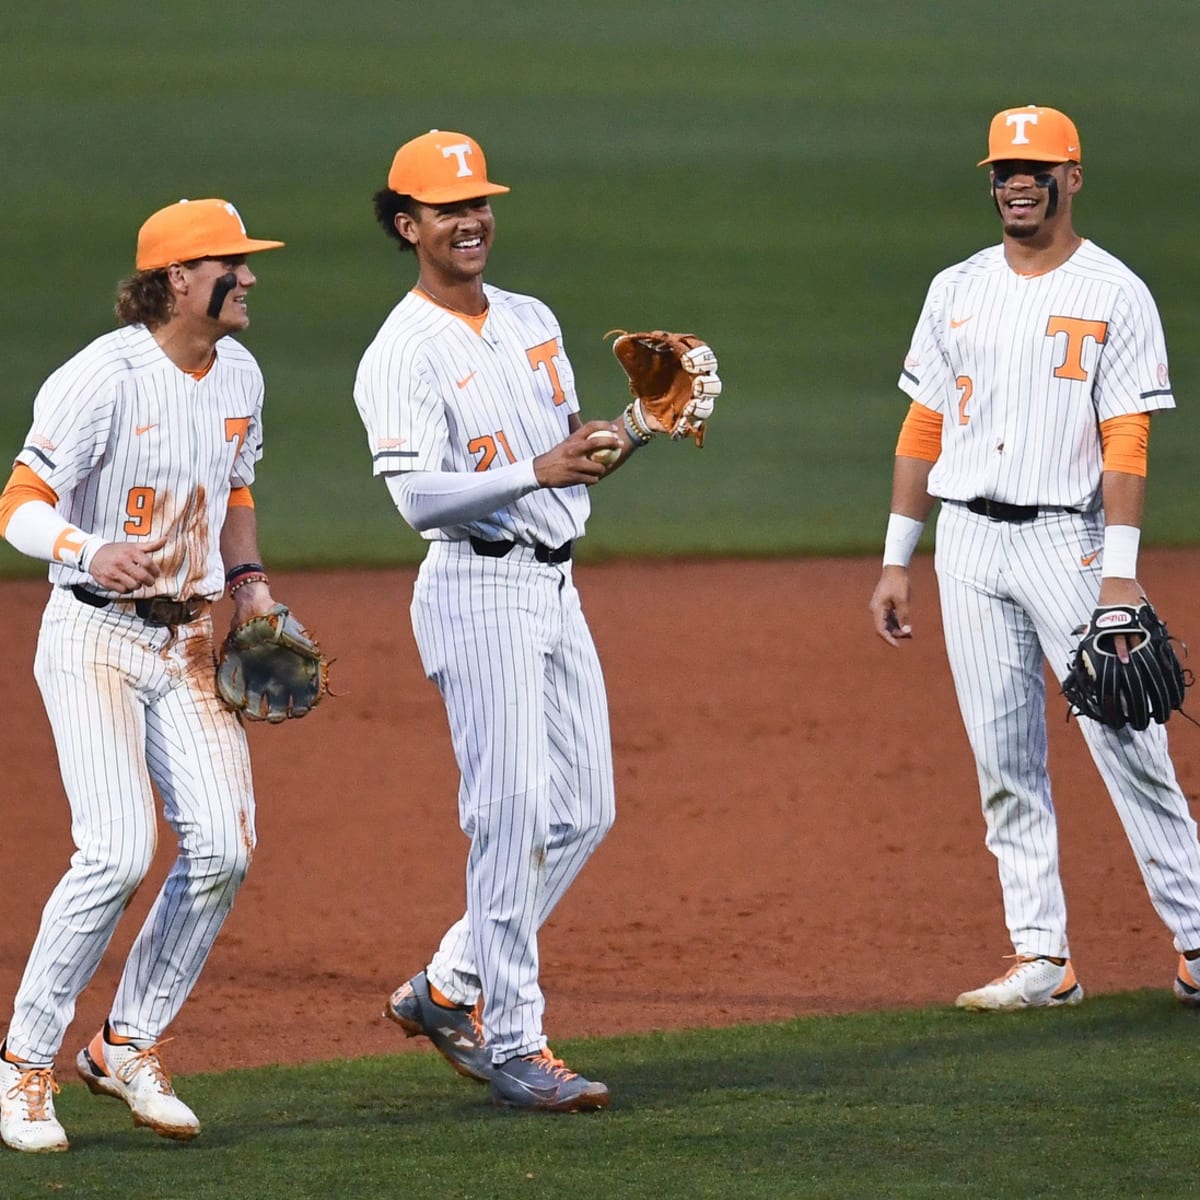 Team Tennessee baseball thrived with top underclassmen